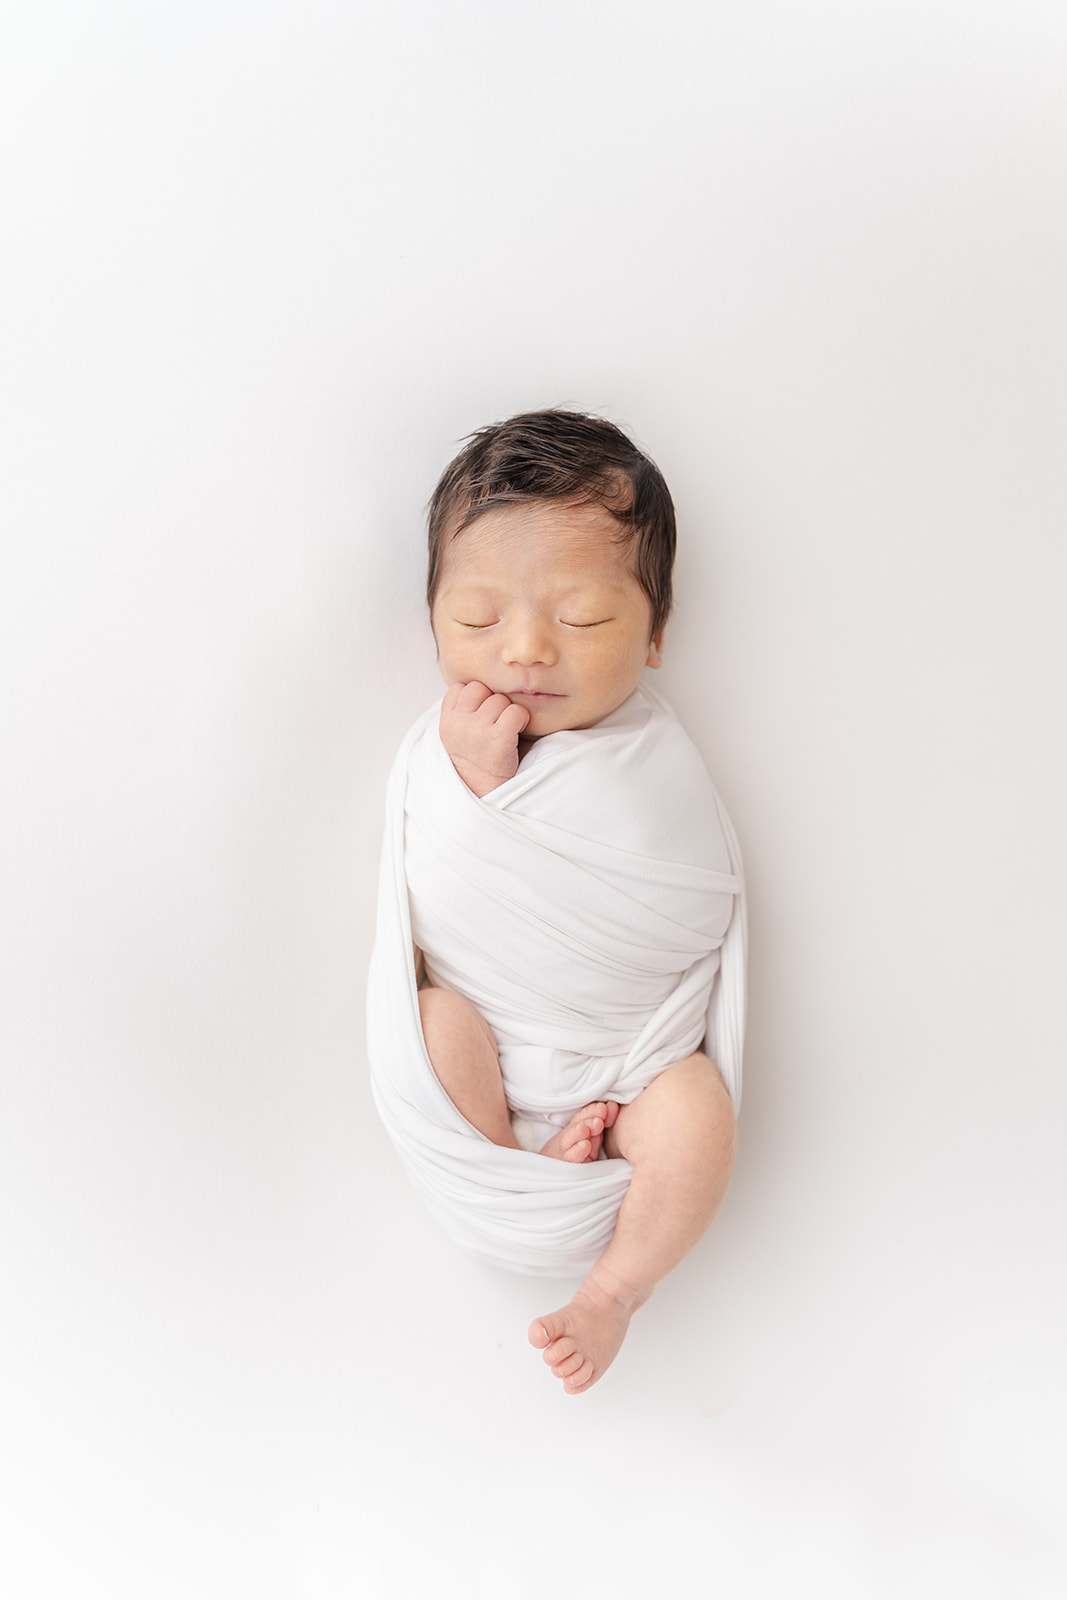 A newborn baby sleeps with one leg sticking out of a white swaddle in a studio